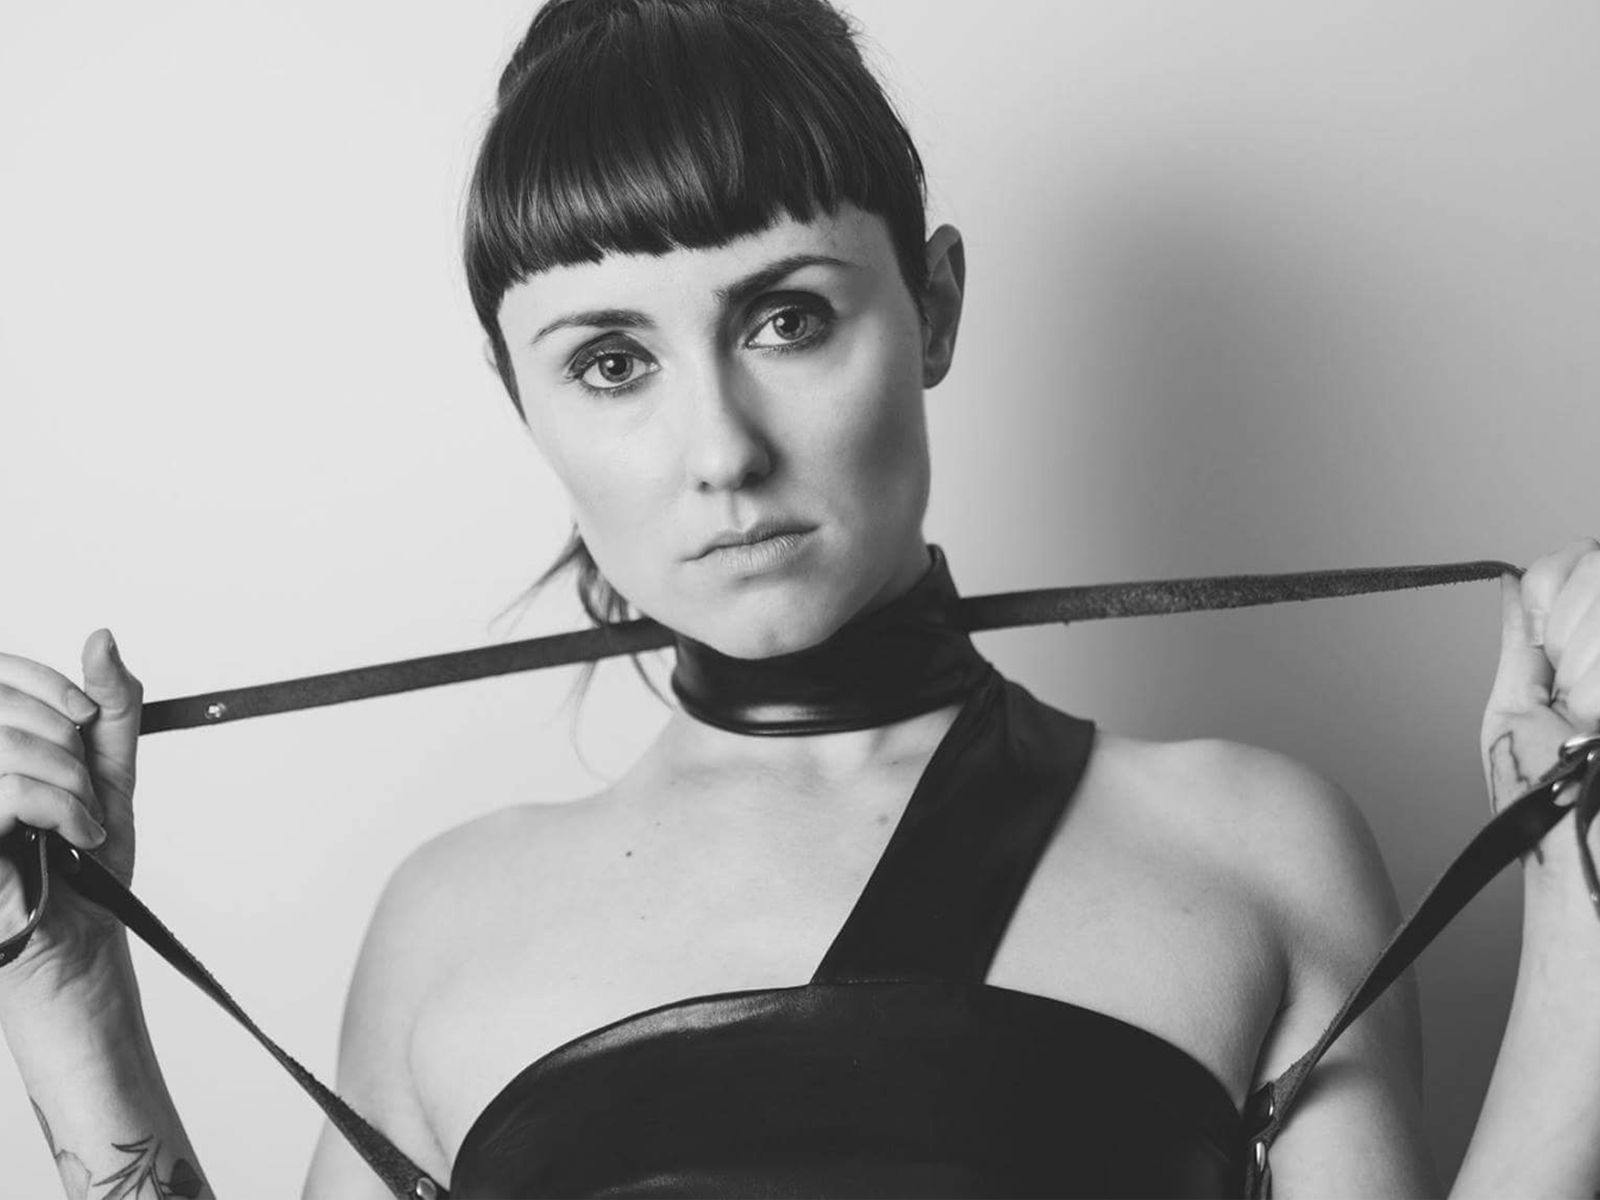 Estée Louder holds two ends of a belt tied around their neck.